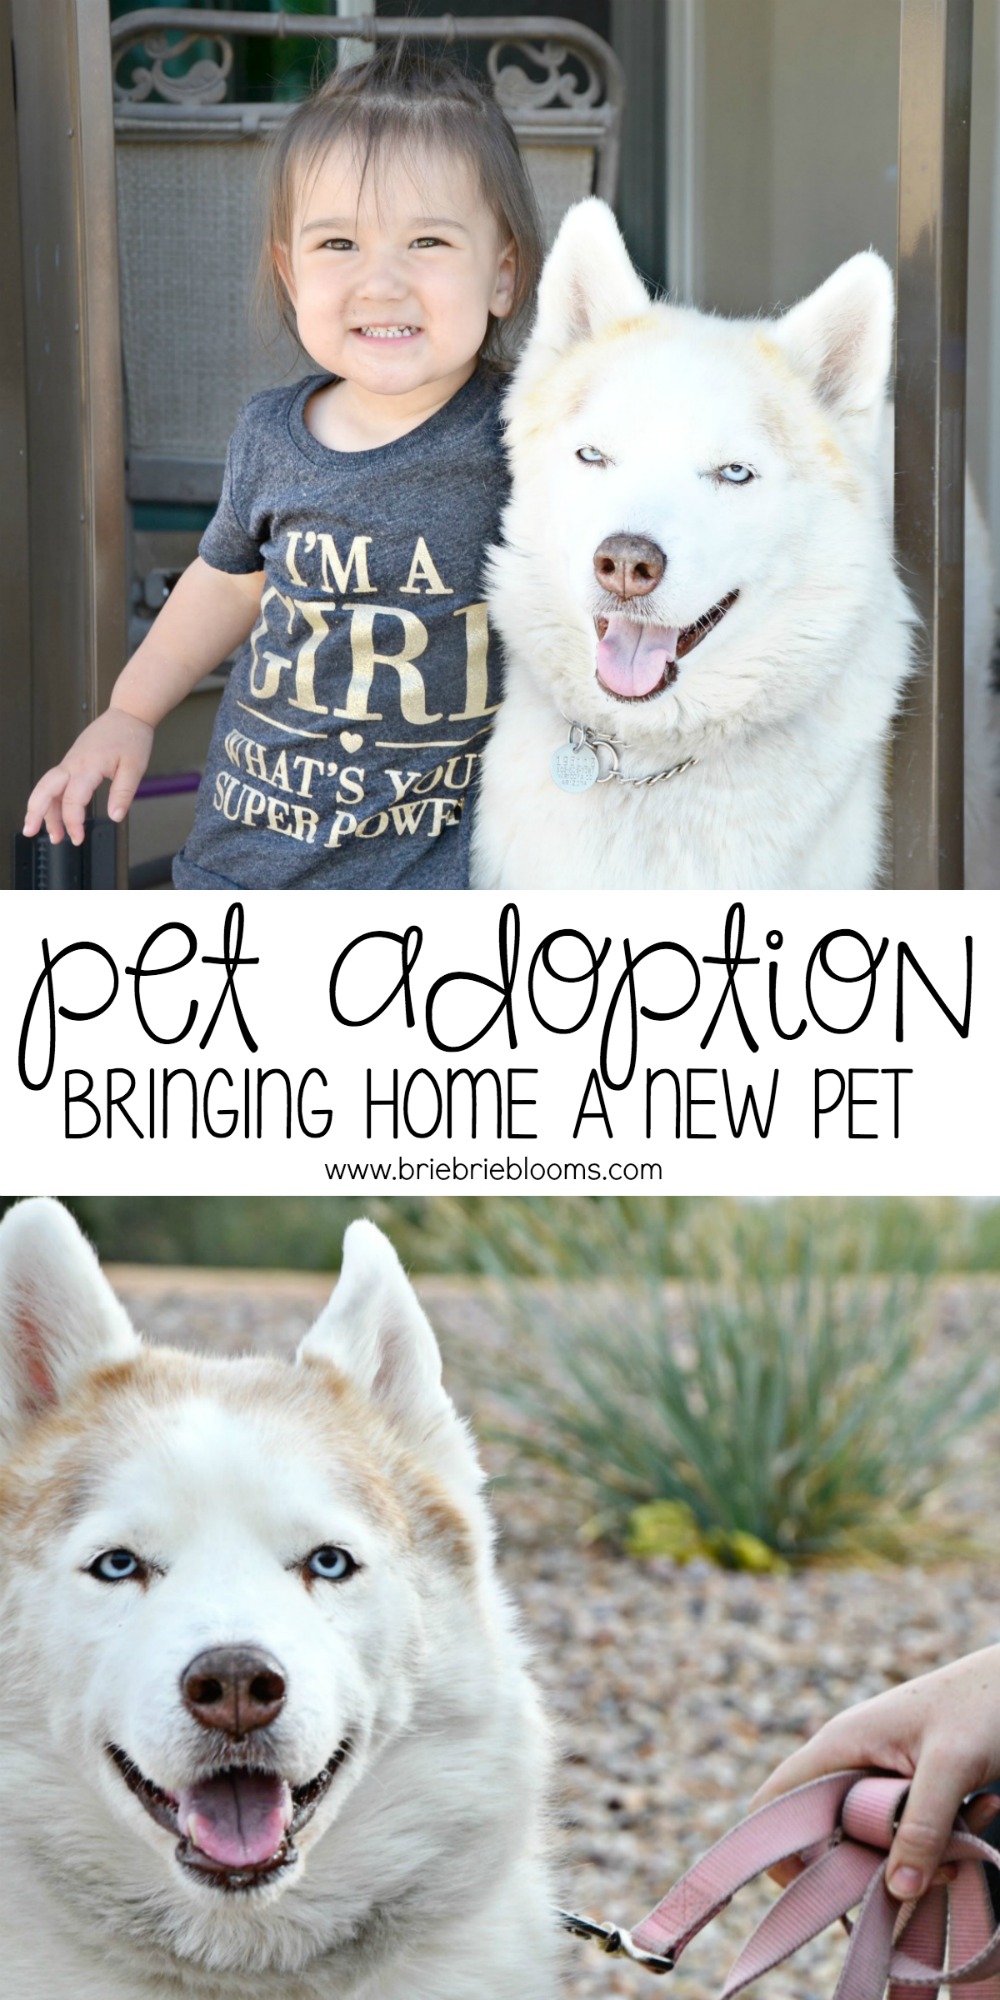 Pet adoption is an excellent way to add a pet to your family. Check out these tips for bringing home a new pet.